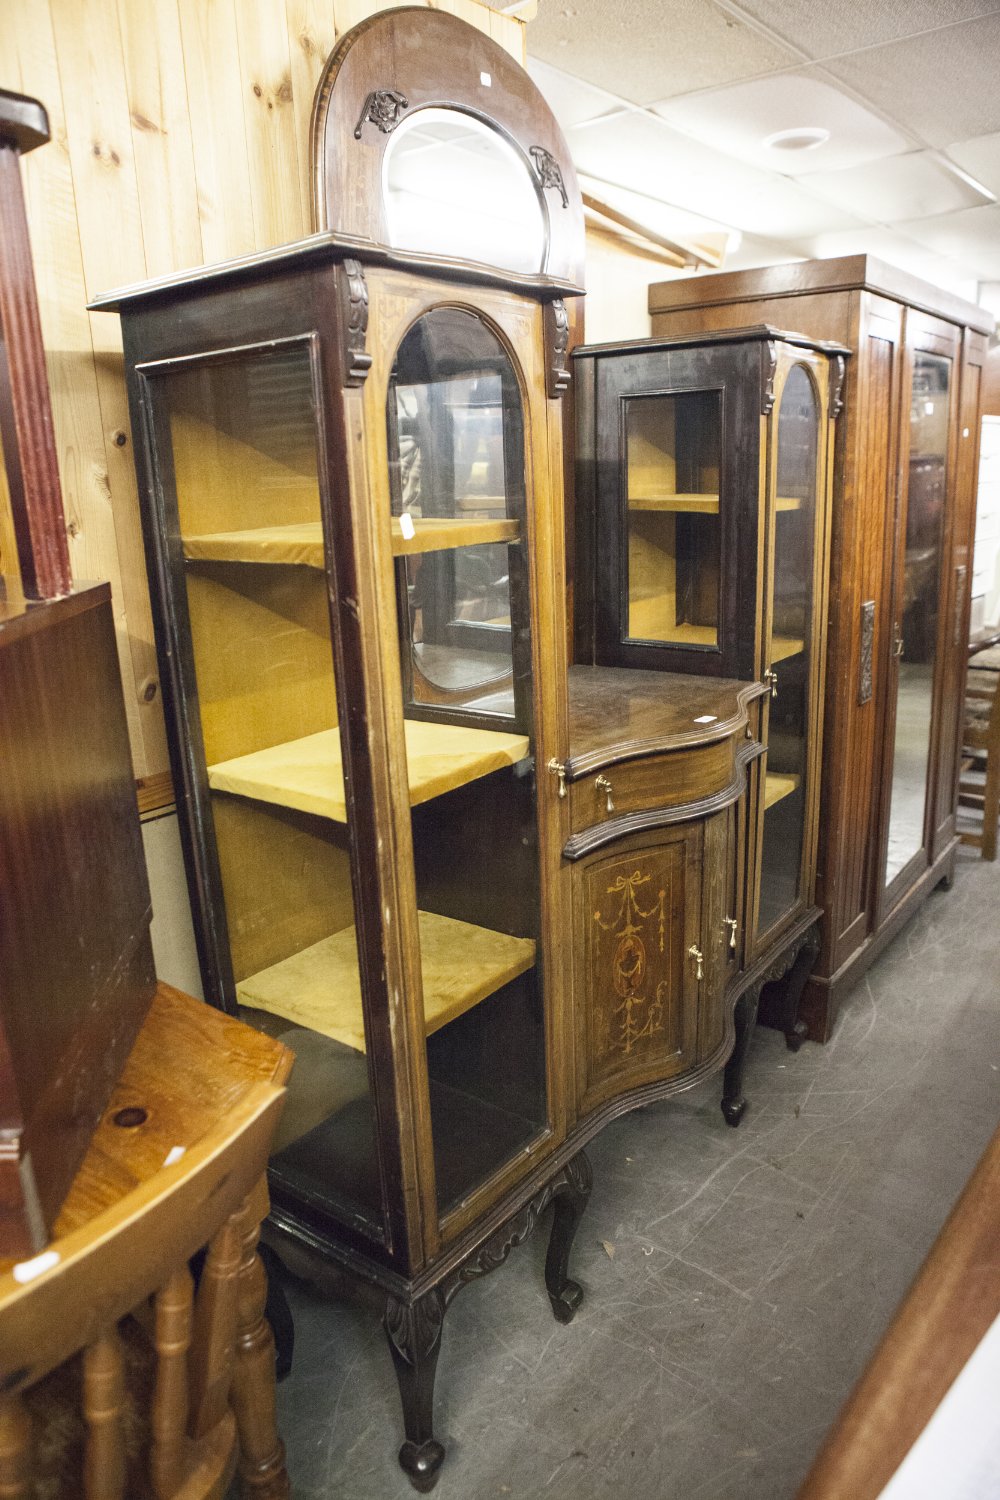 EDWARDIAN INLAID MAHOGANY 'SIDE BY SIDE' DISPLAY CABINET, WITH SHAPED OBLONG BEVEL EDGED MIRROR